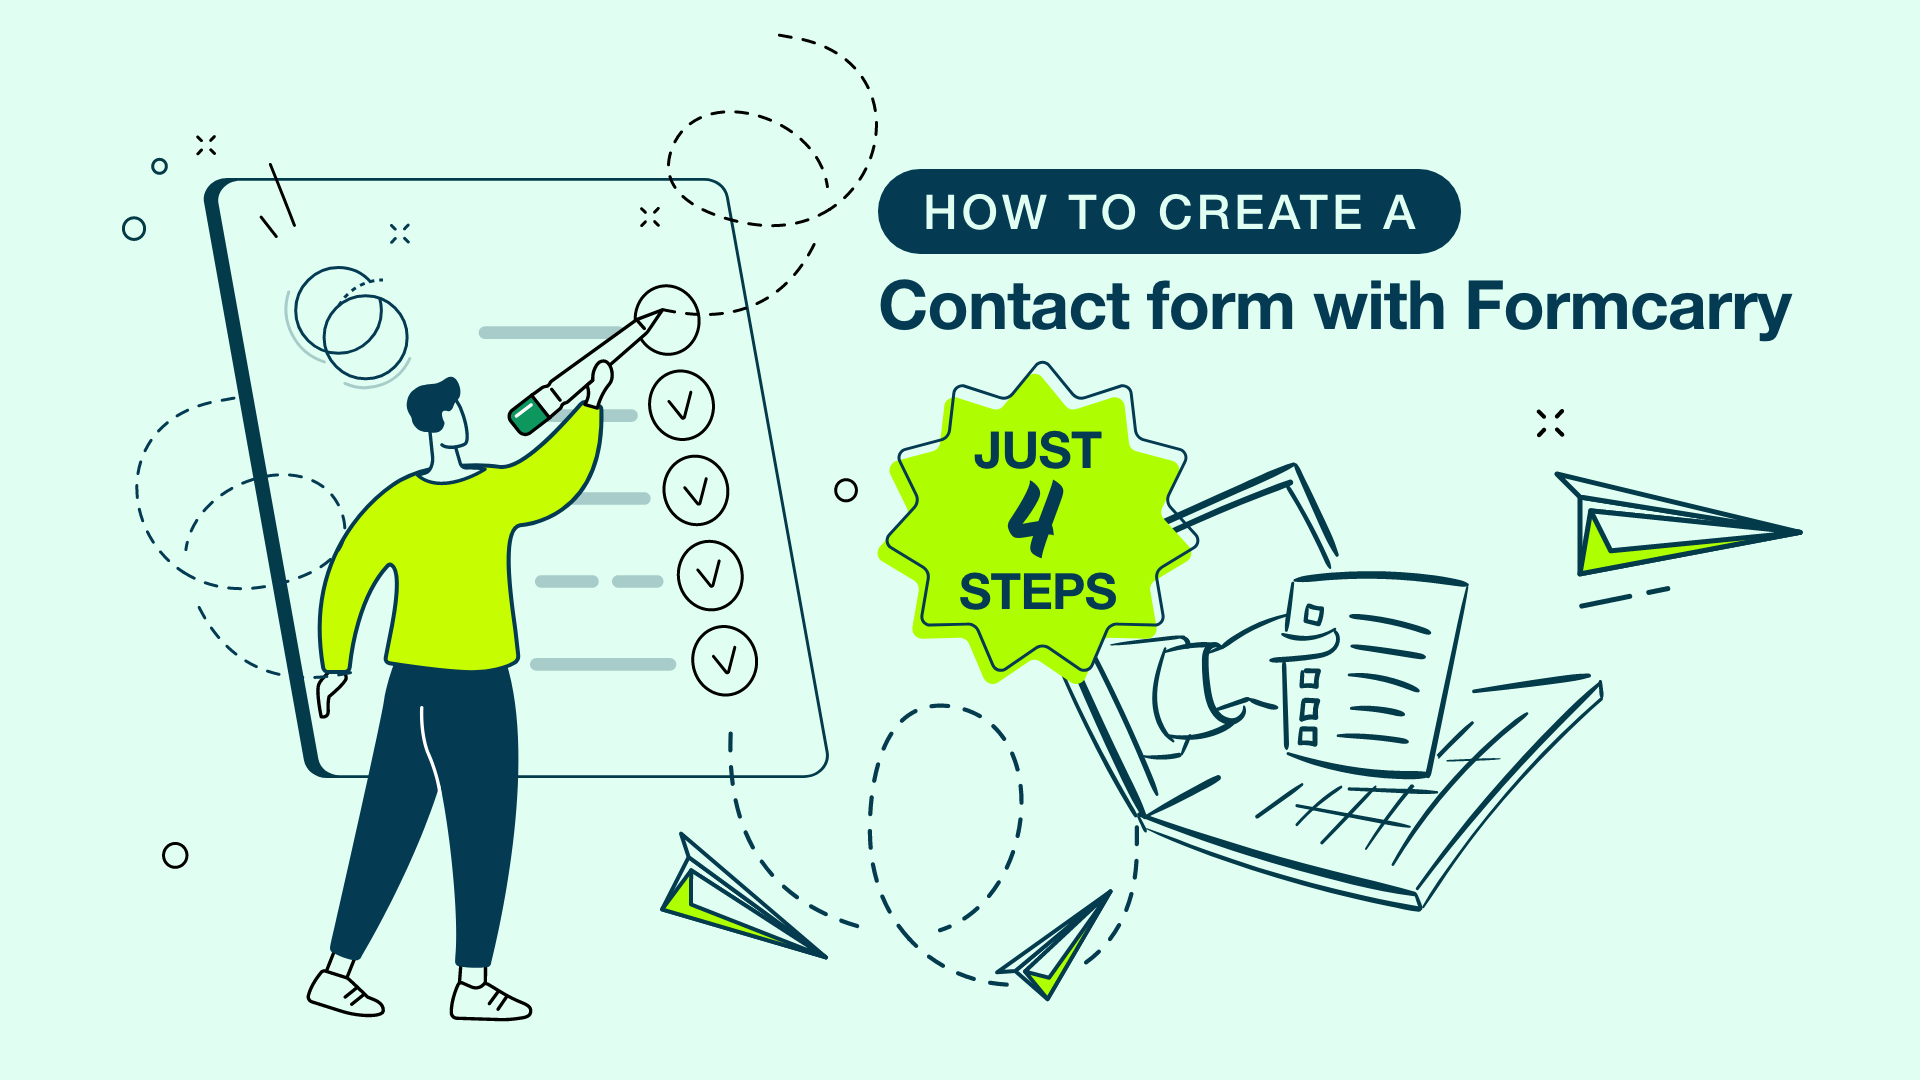 Contact Page screen design idea #45: How to create a contact form and collect submissions in 4 steps